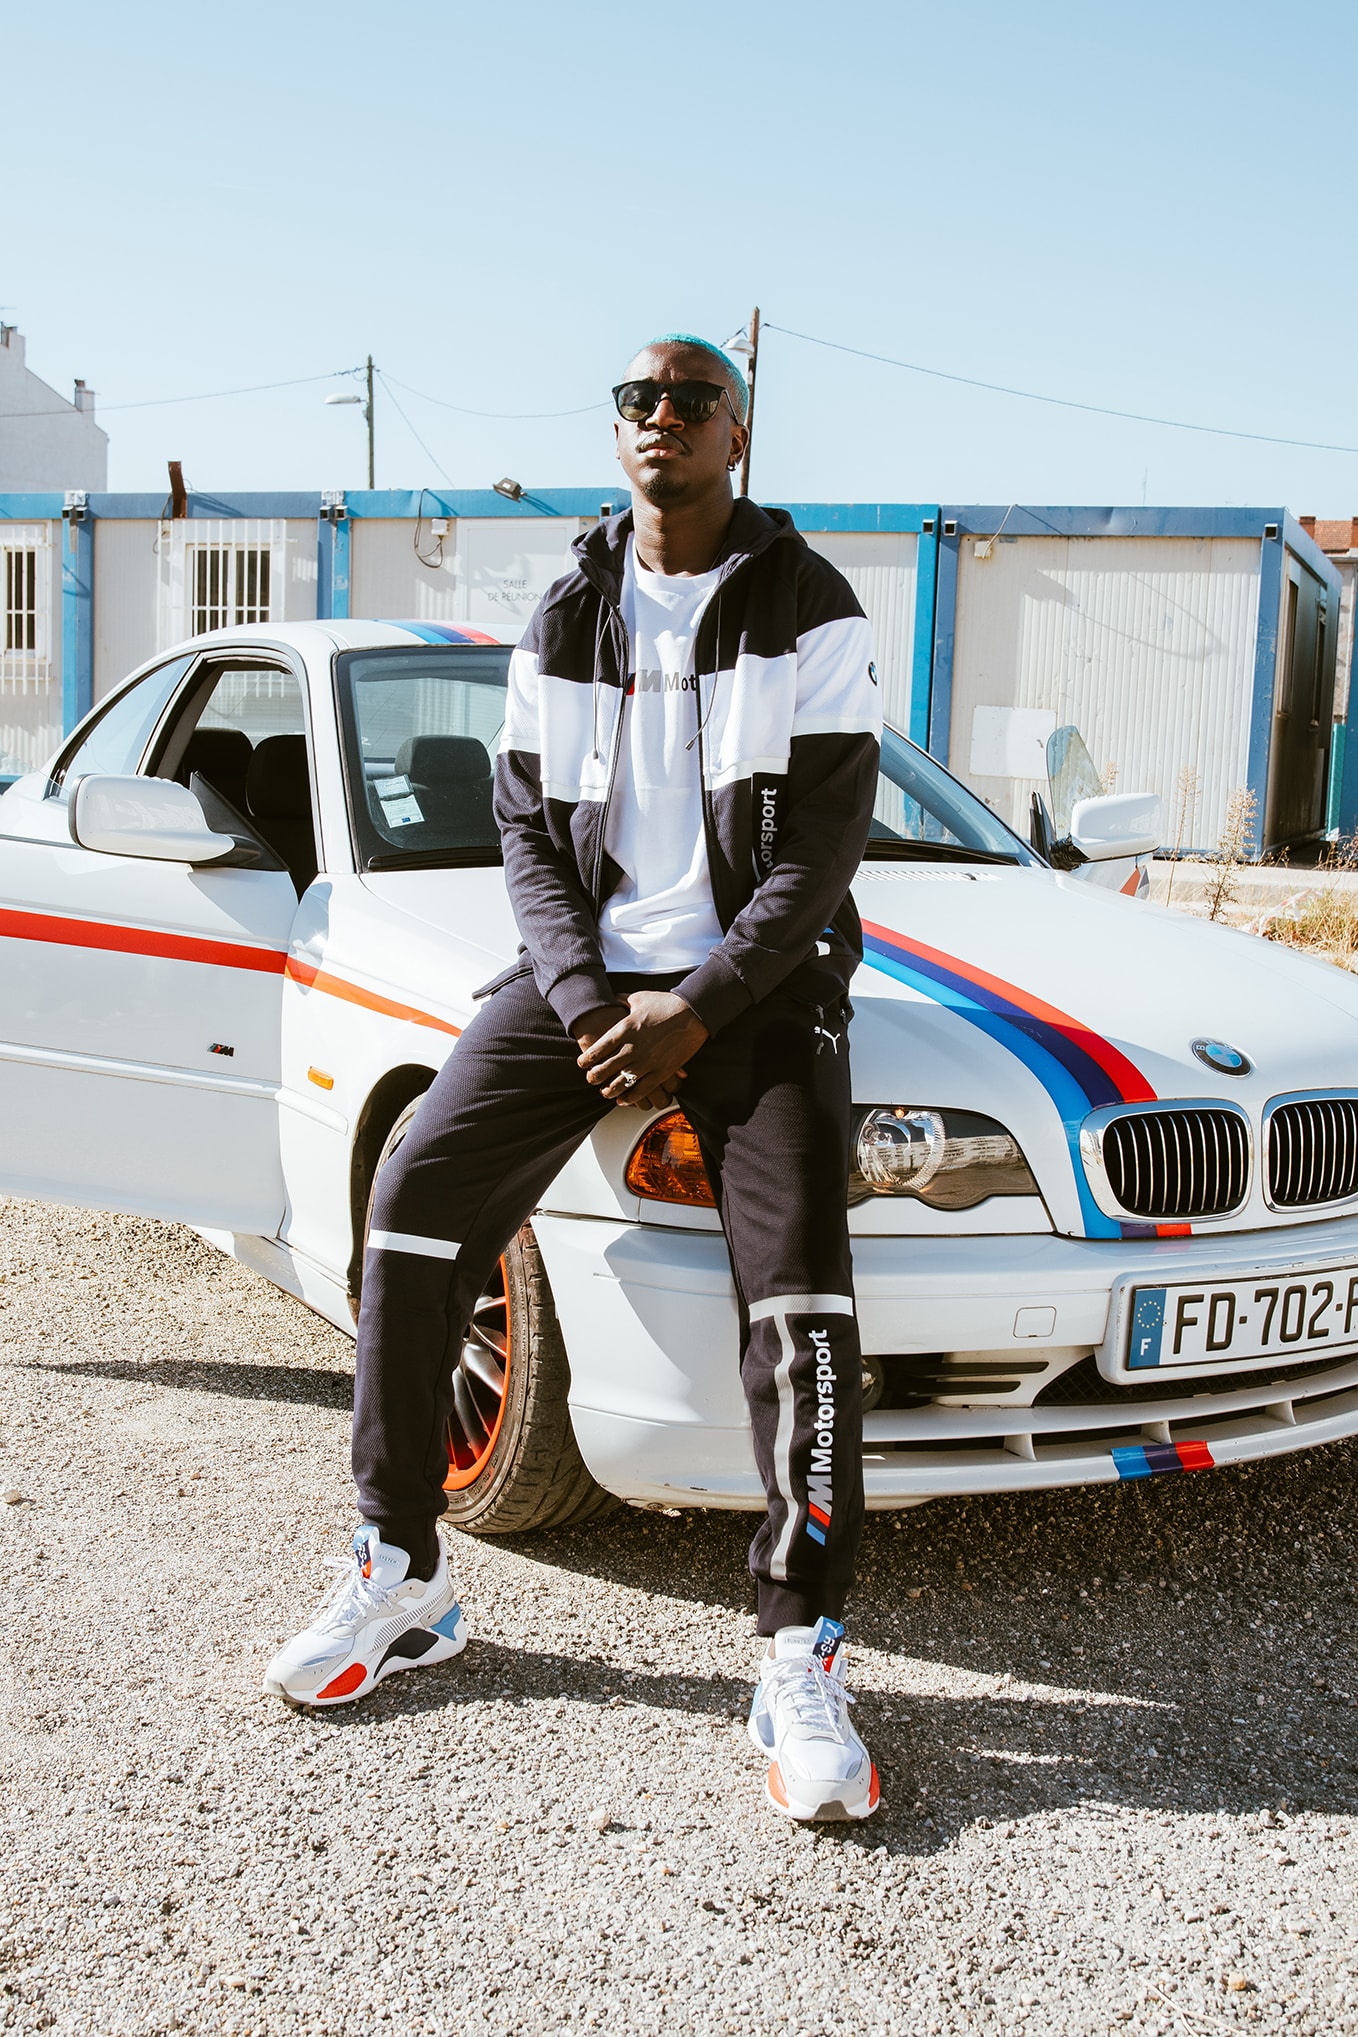 PUMA BMW RS-X sneaker collection photos